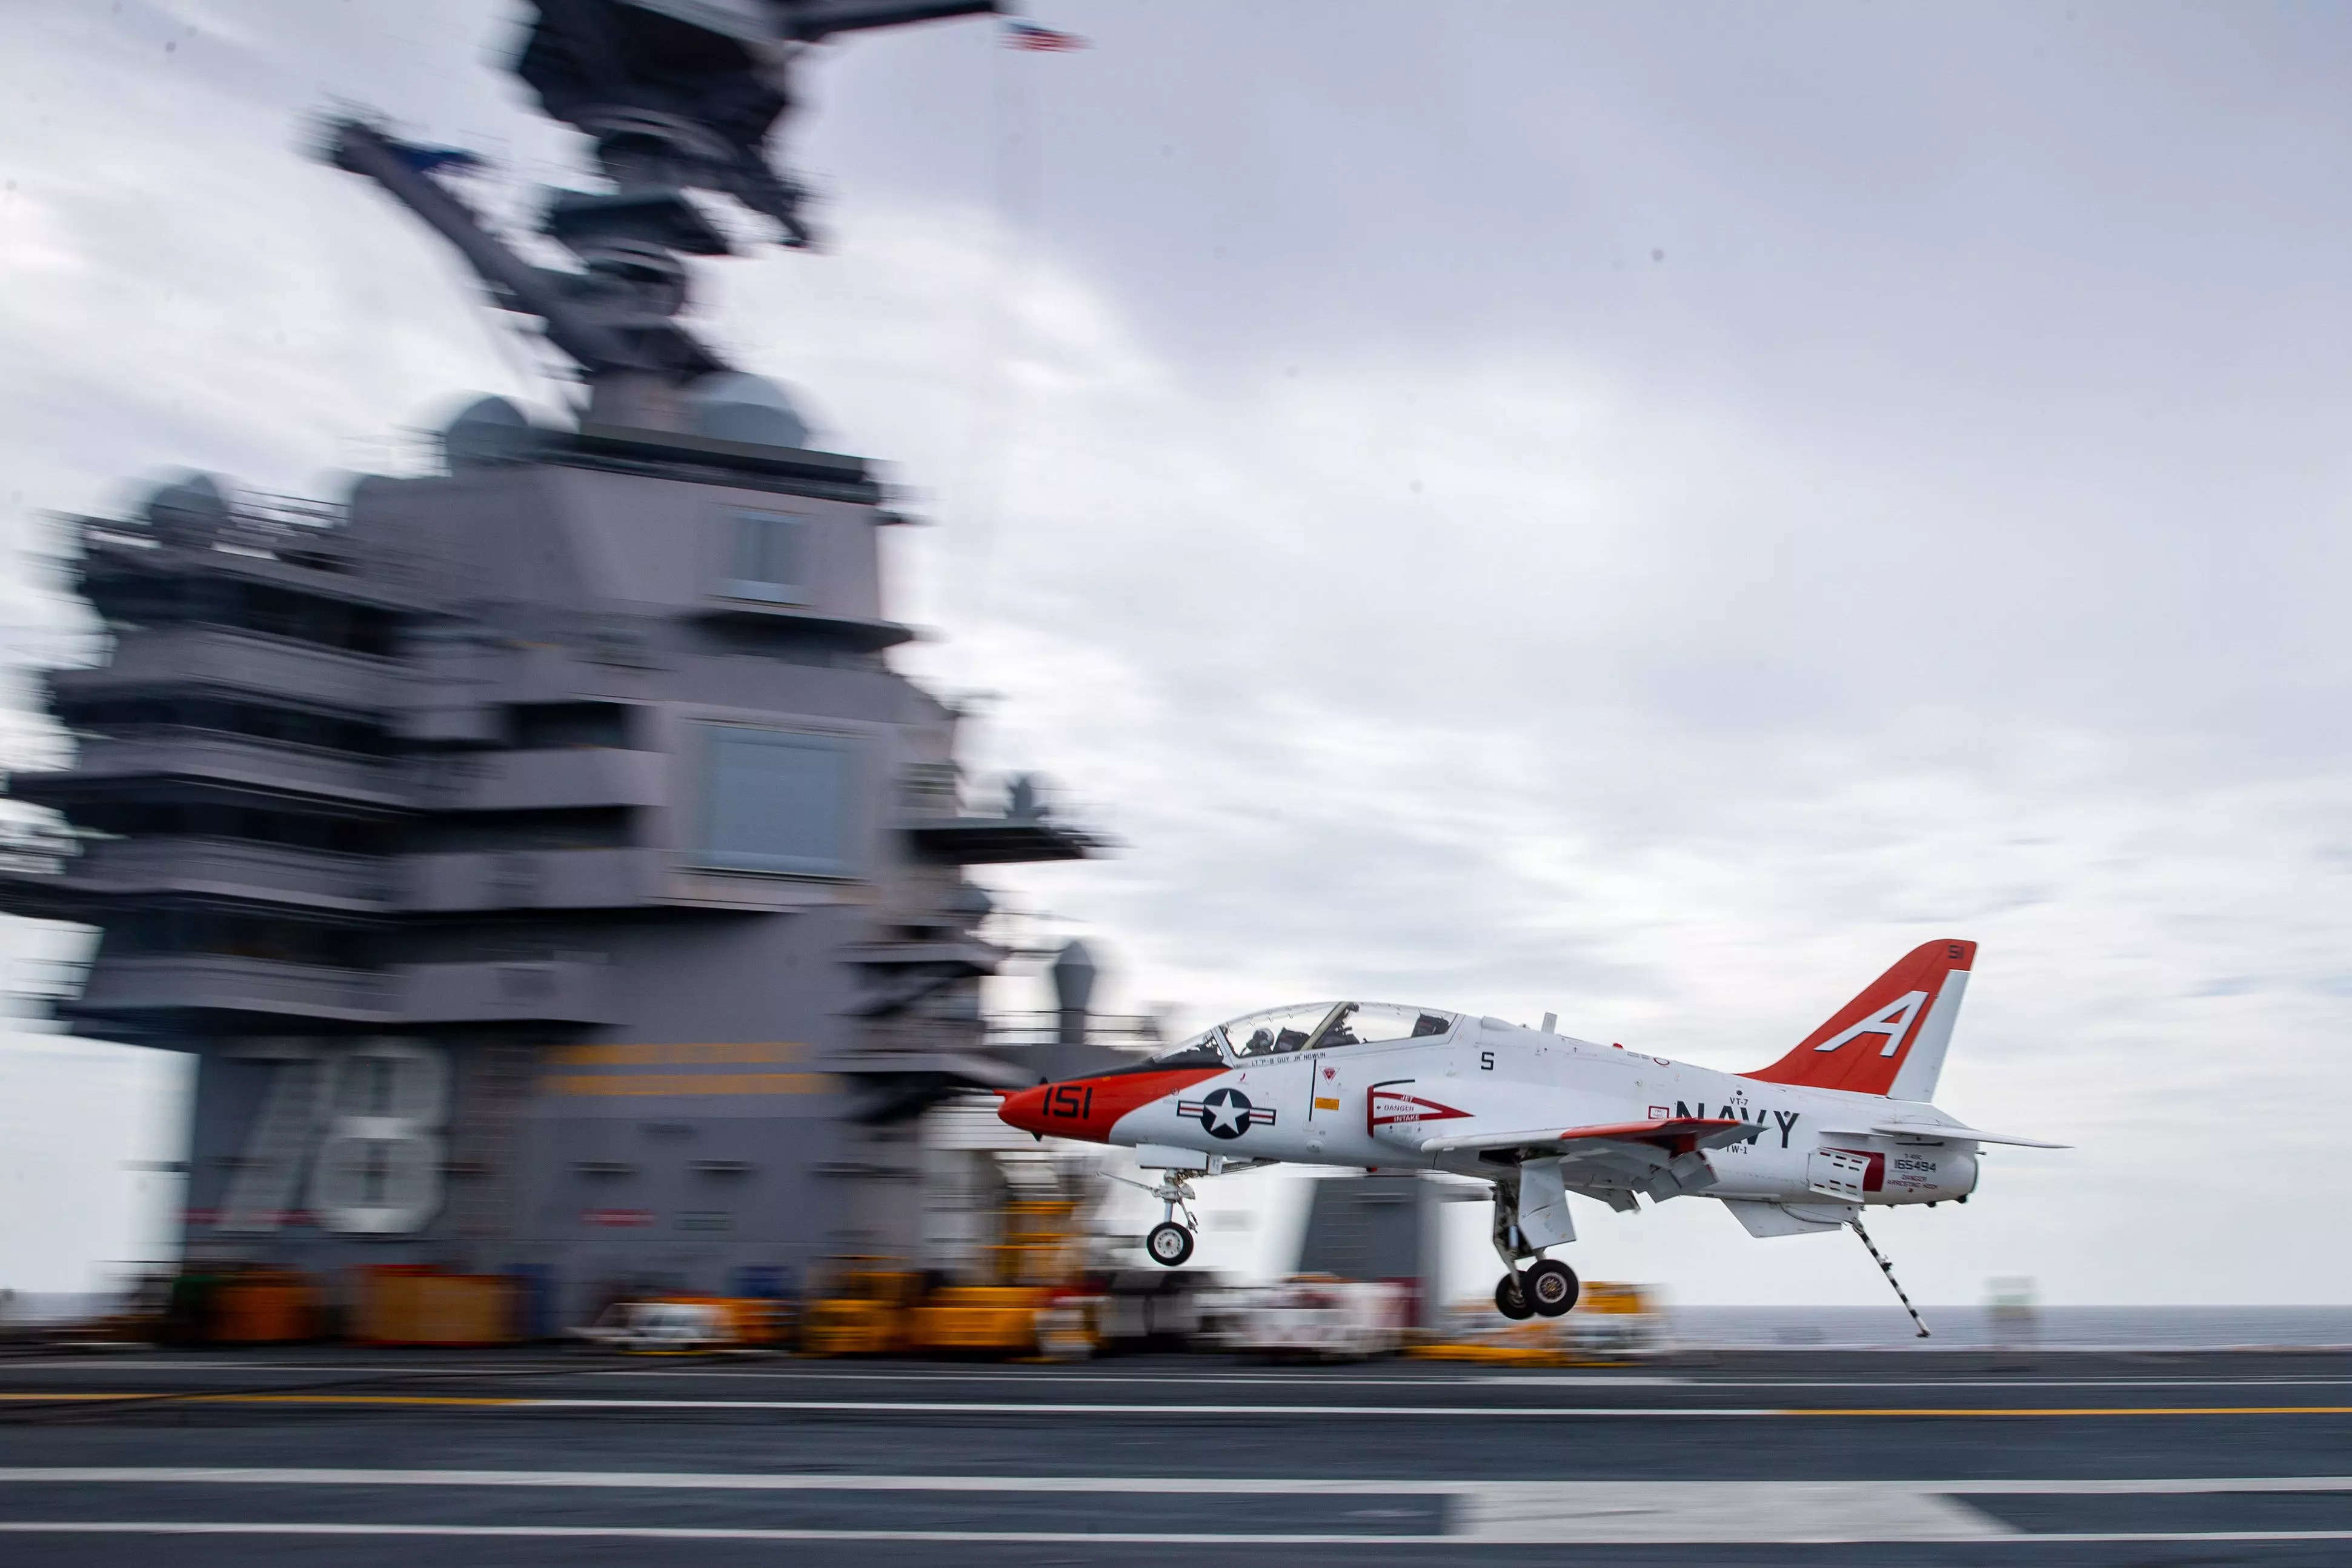 A T-45C Goshawk training aircraft attached to Training Air Wing (TAW) 1, lands aboard the aircraft carrier USS Gerald R. Ford (CVN 78) during flight operations, Sept. 12, 2020.